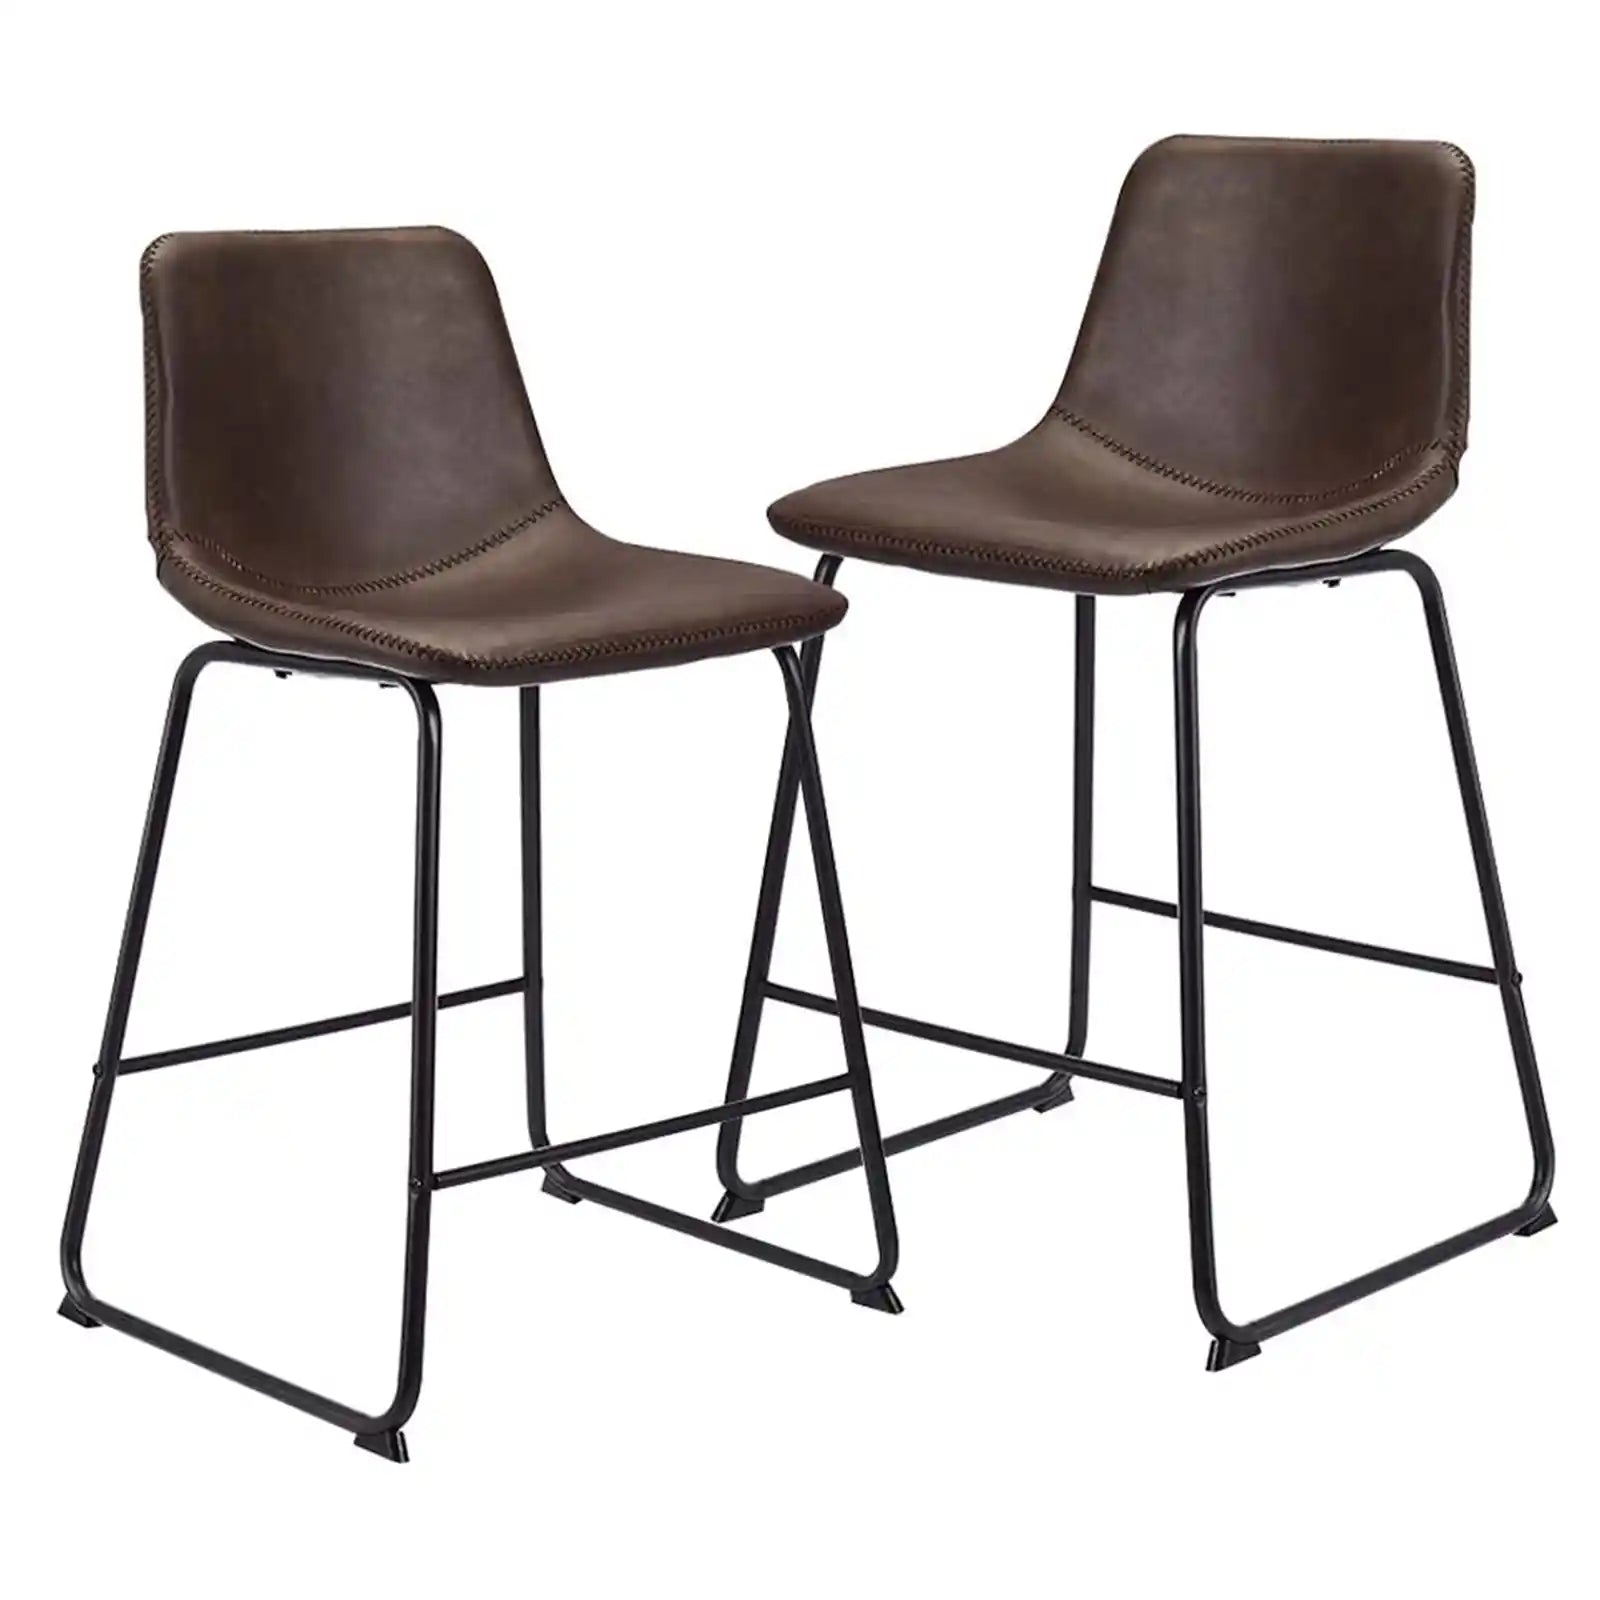 Set of 2 Faux Leather Bar Stools, Dining Chair